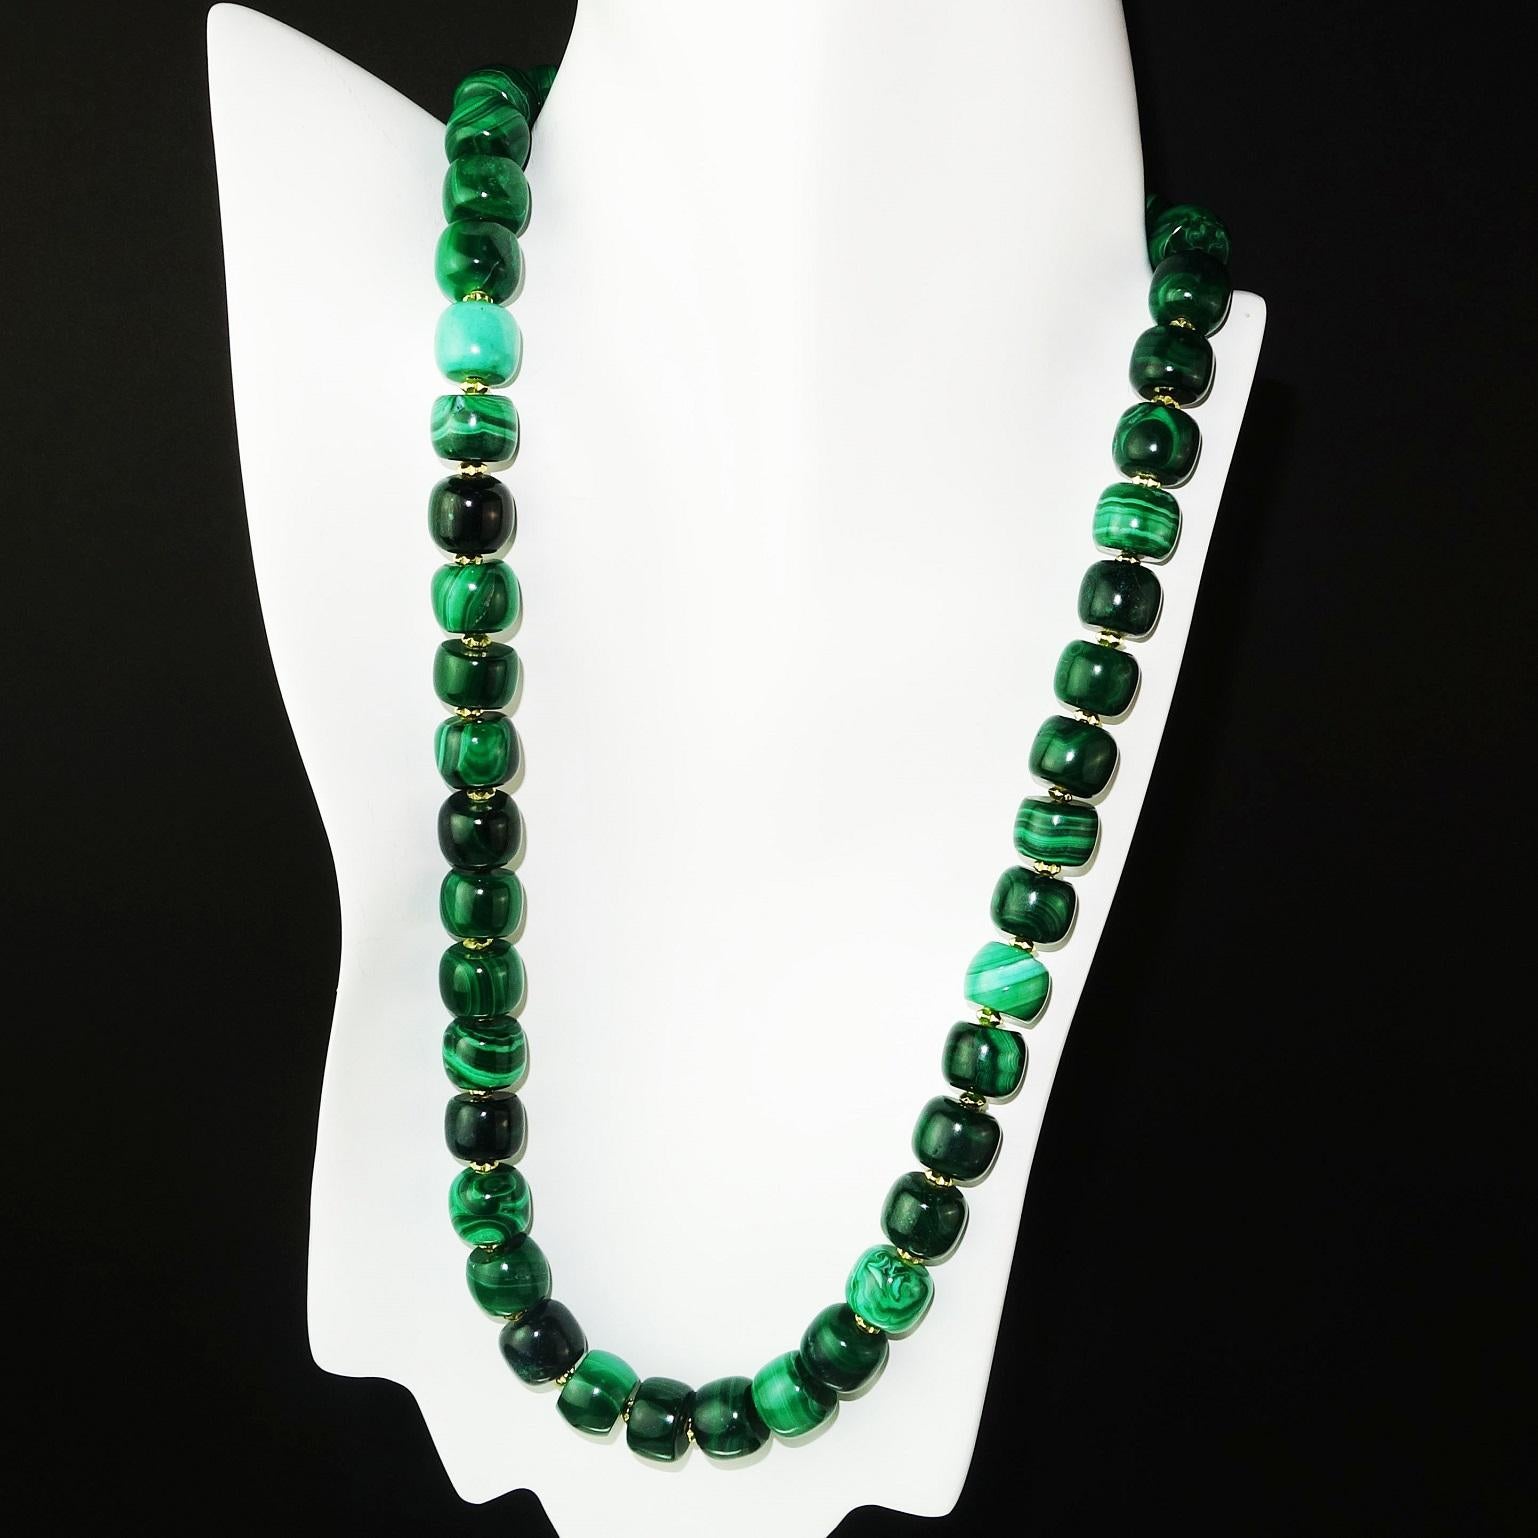 Artisan AJD 22 Inch Glowing Highly Polished Green Malachite Necklace